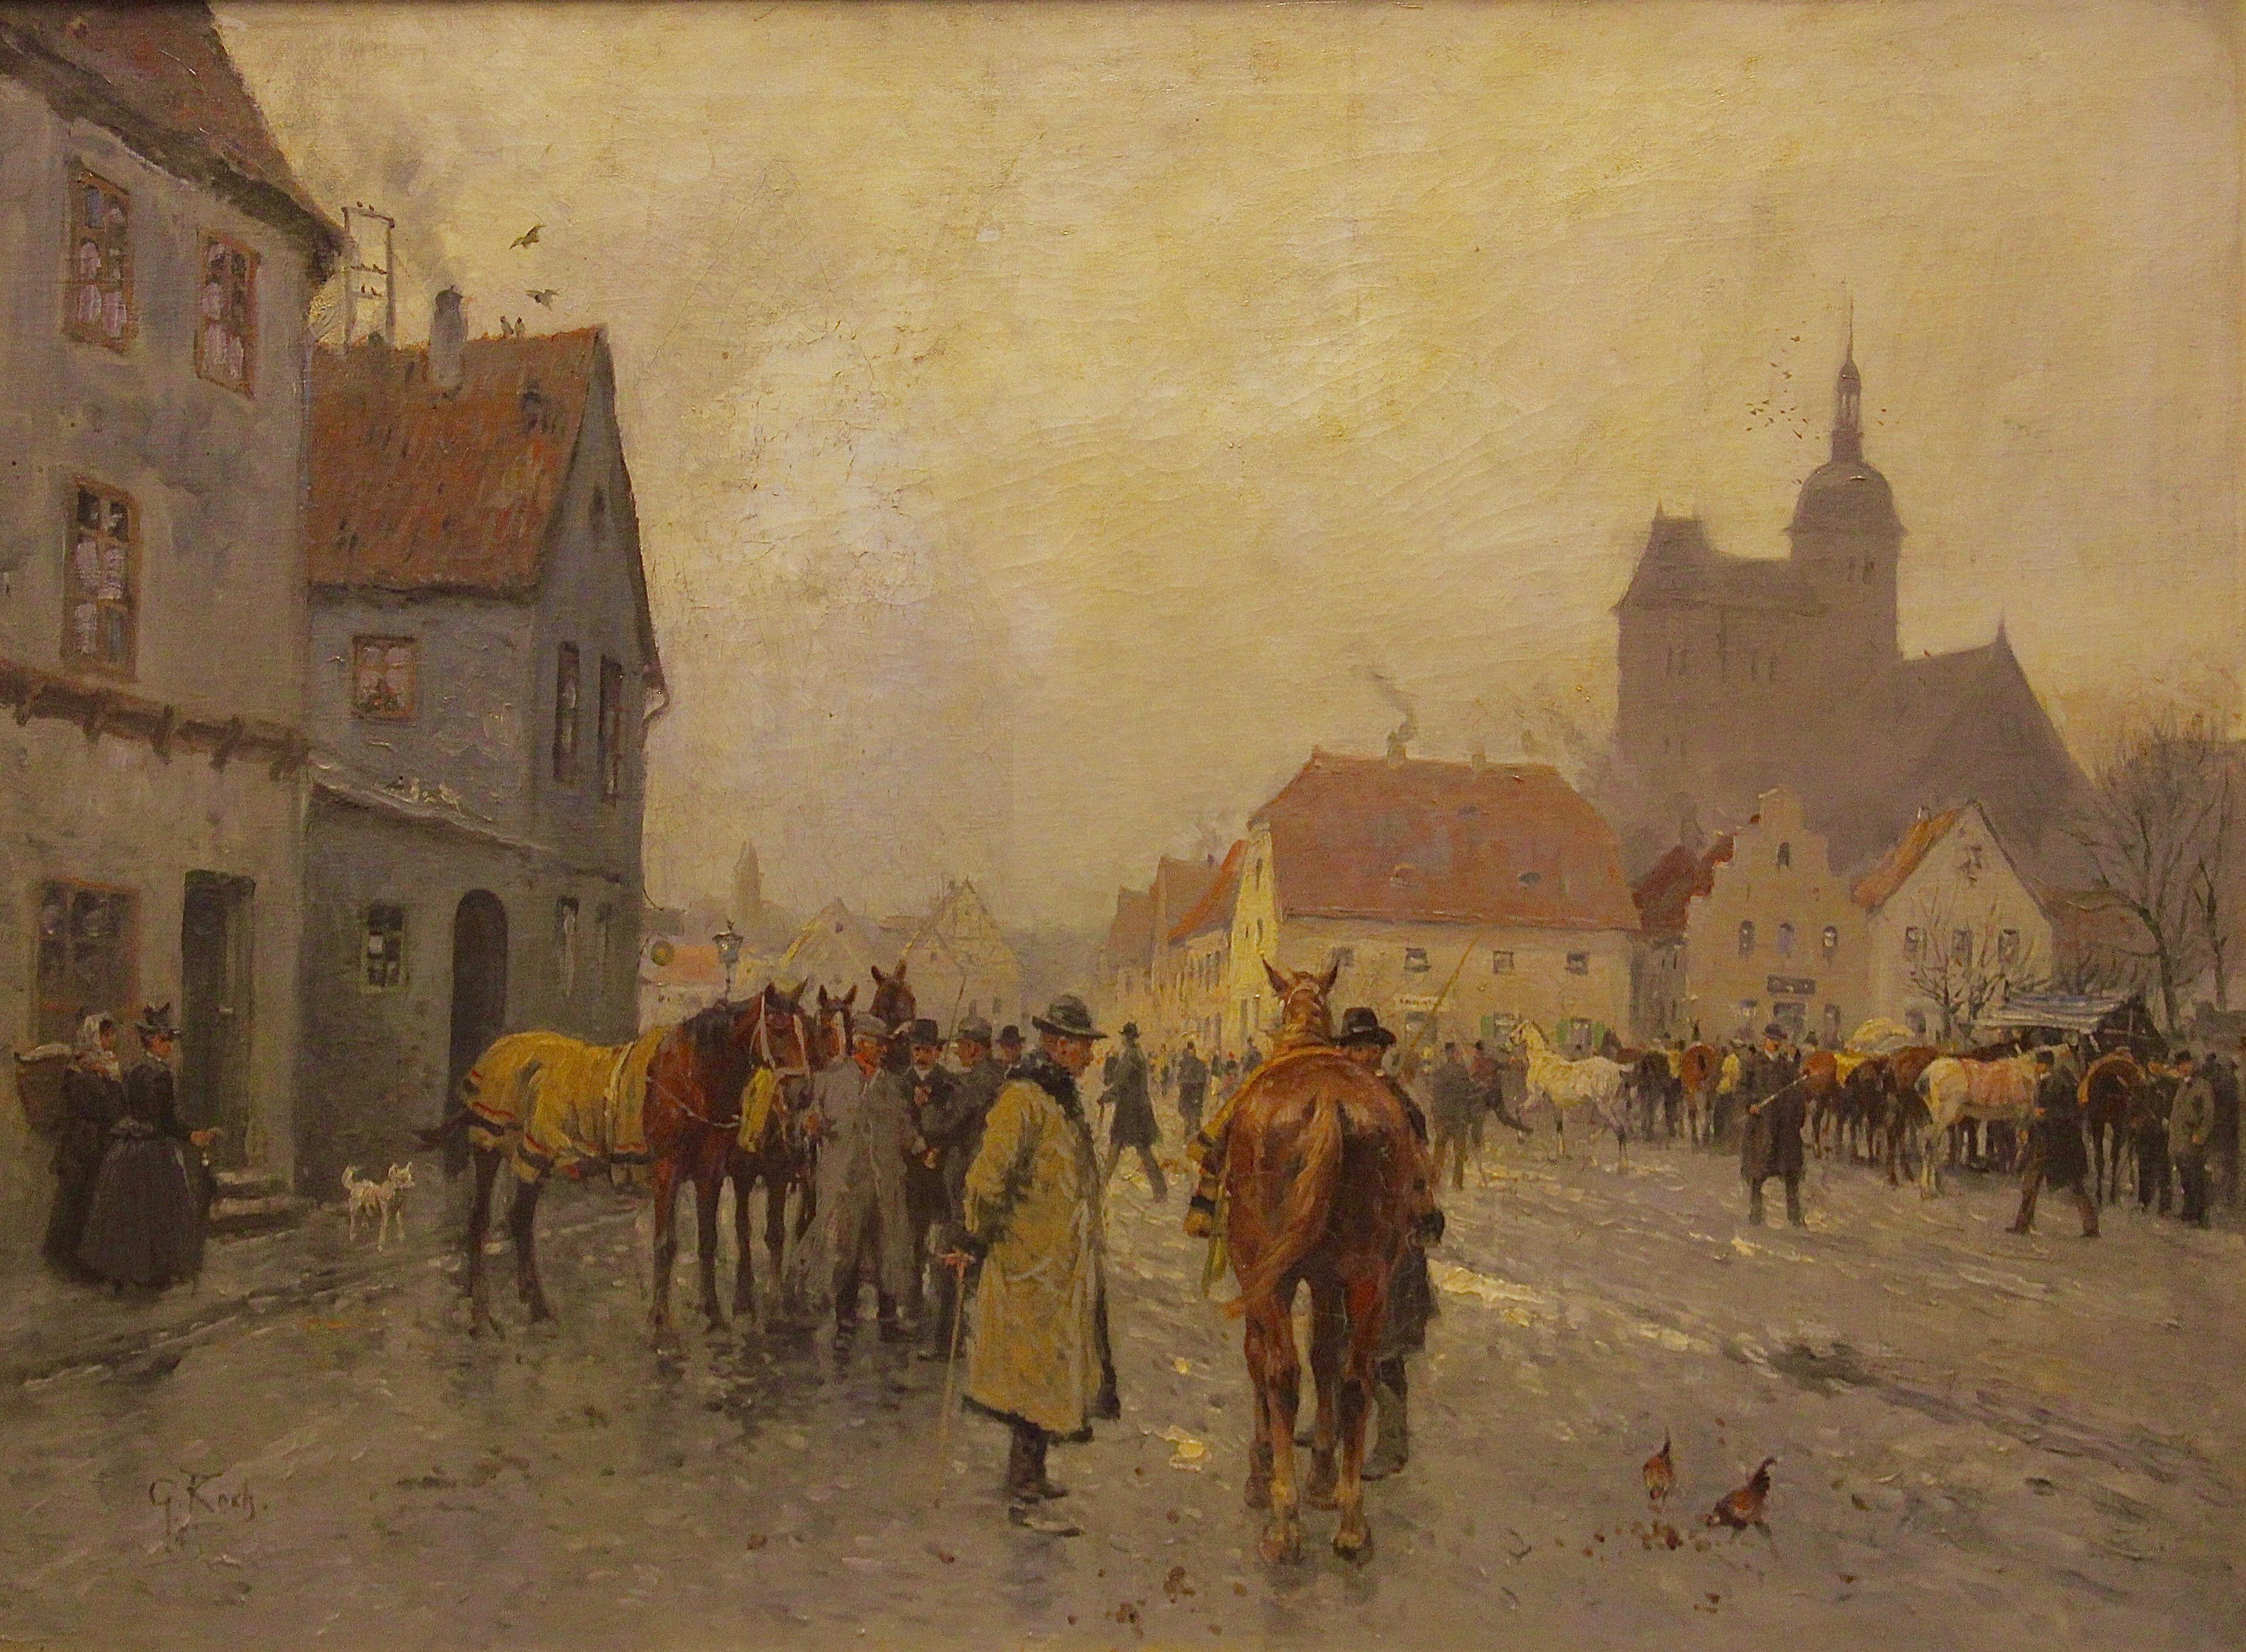 Georg Koch 1857-1936, "At the horse market" Oil on canvas circa 1900